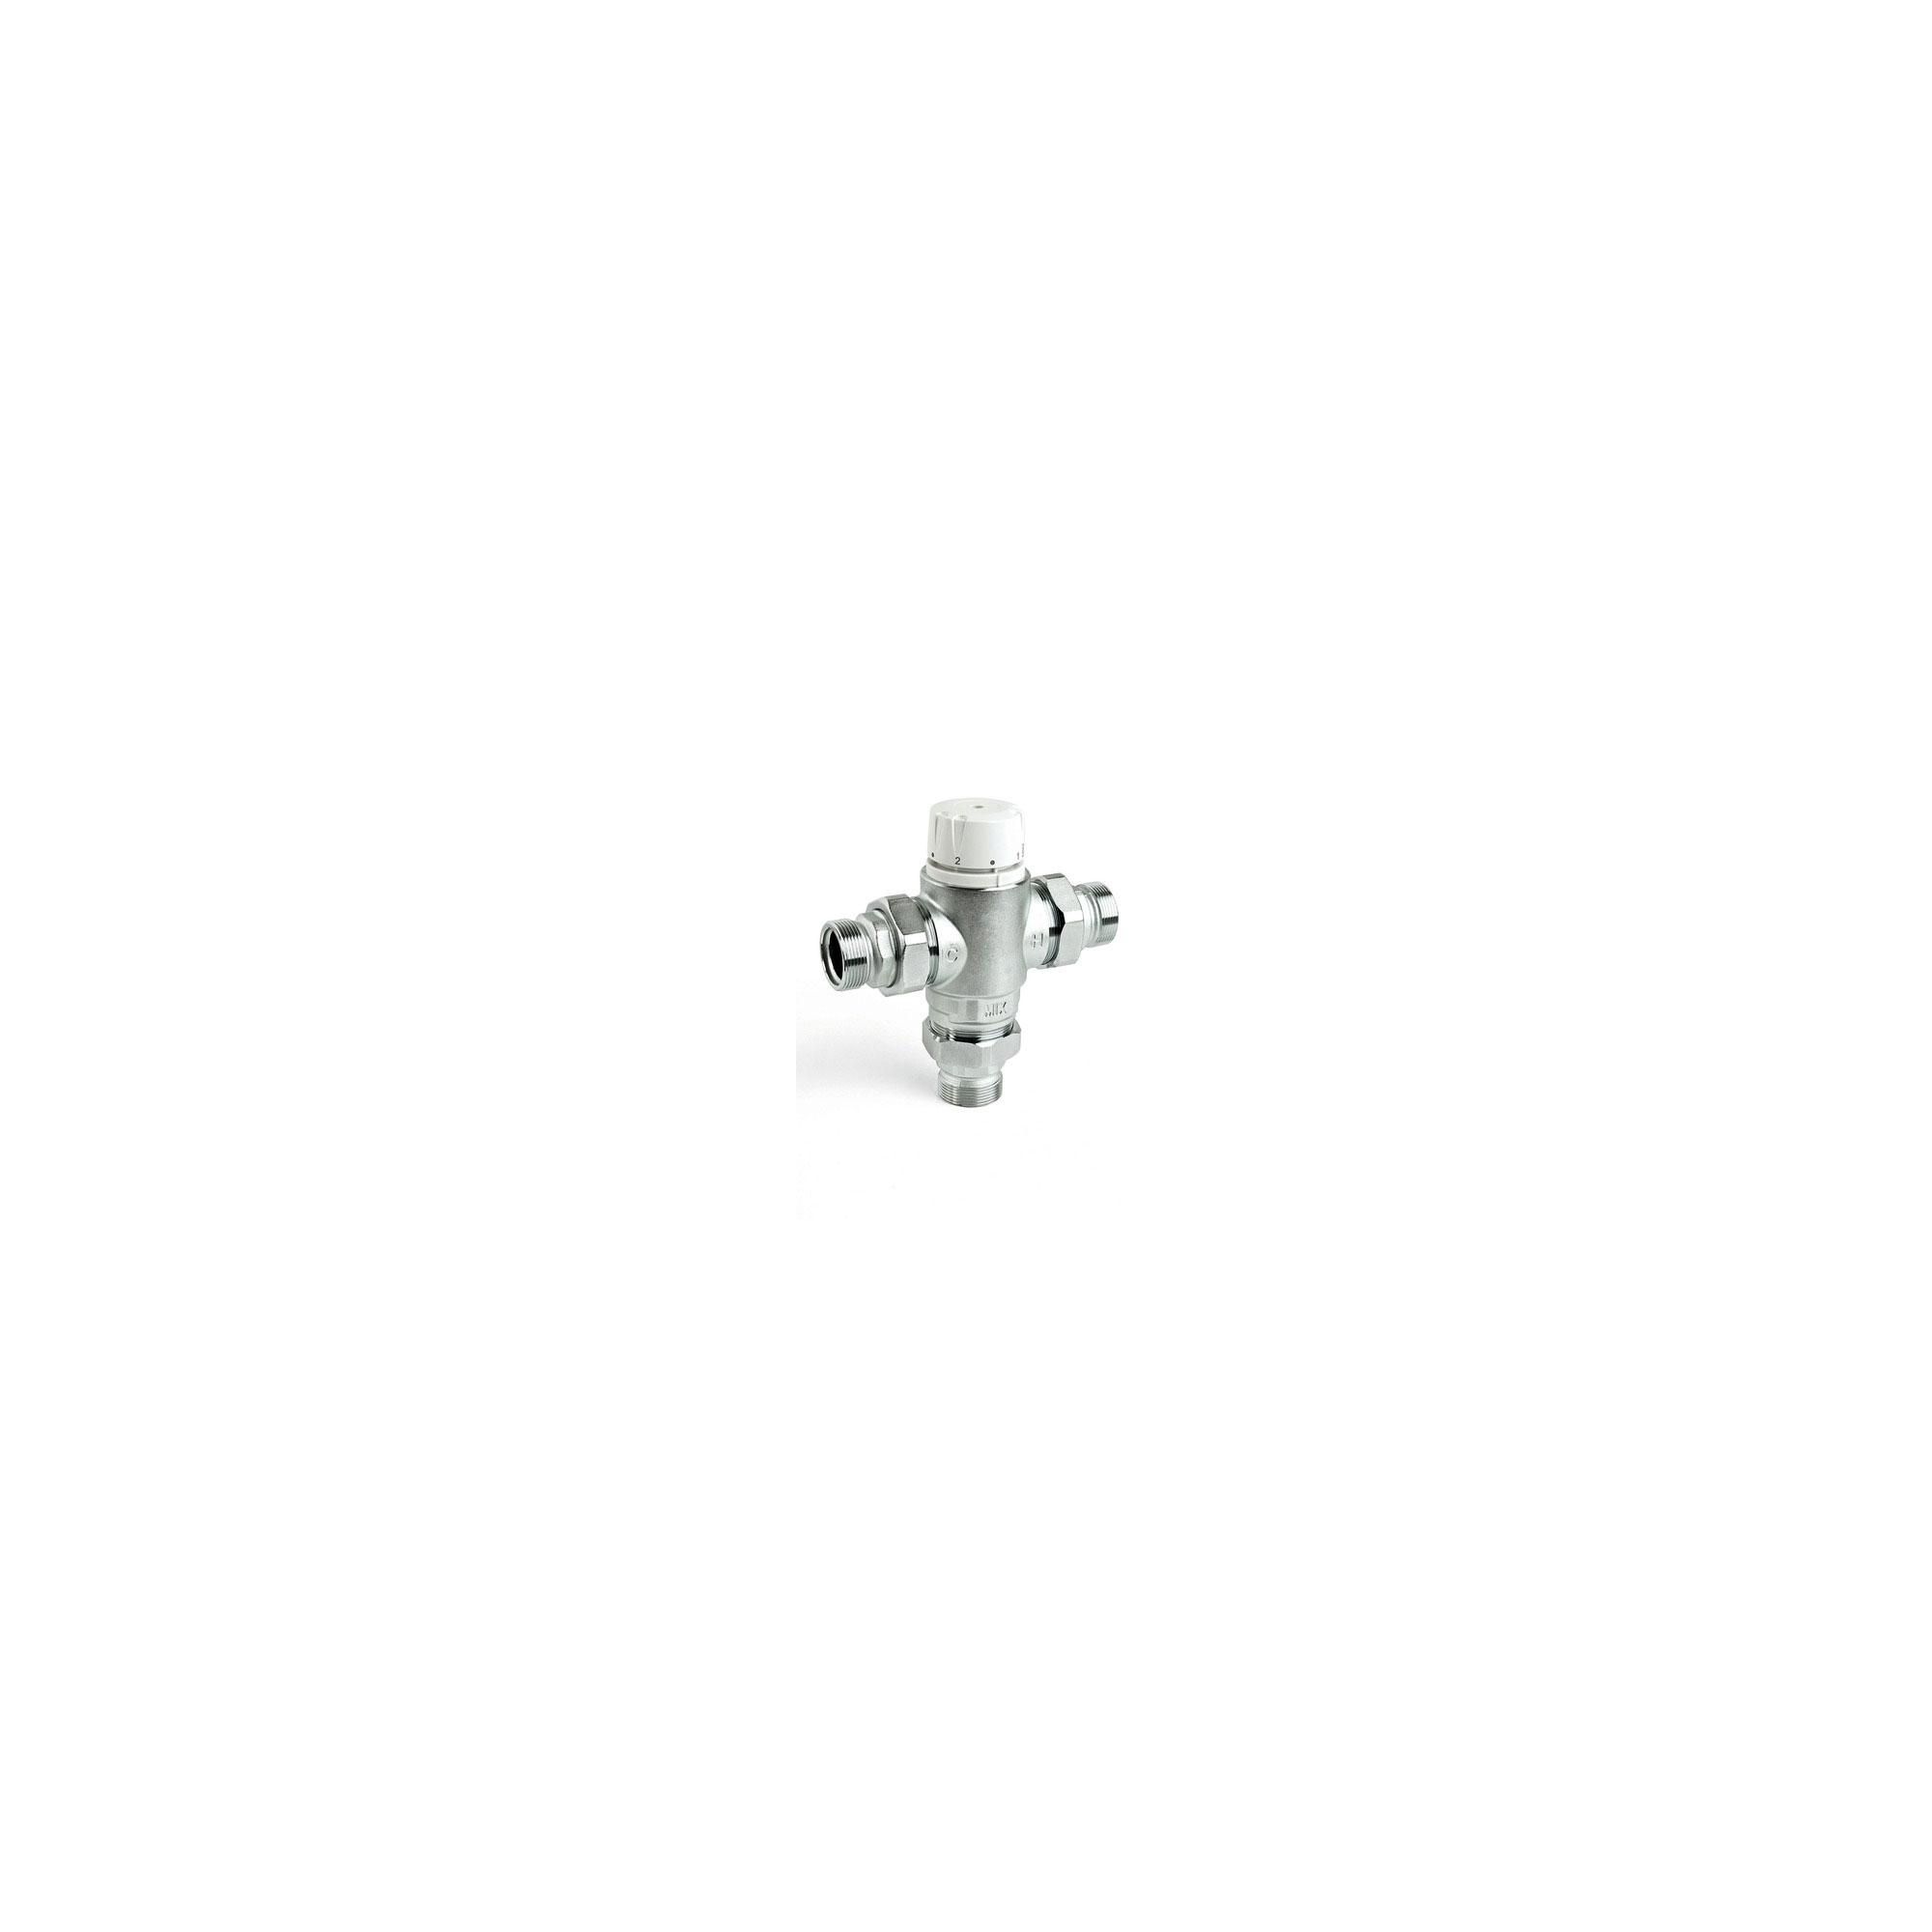 Intamix Pro Thermostatic Mixing Valve 3/4 with Screwed Iron and Check Valves at Tesco Direct